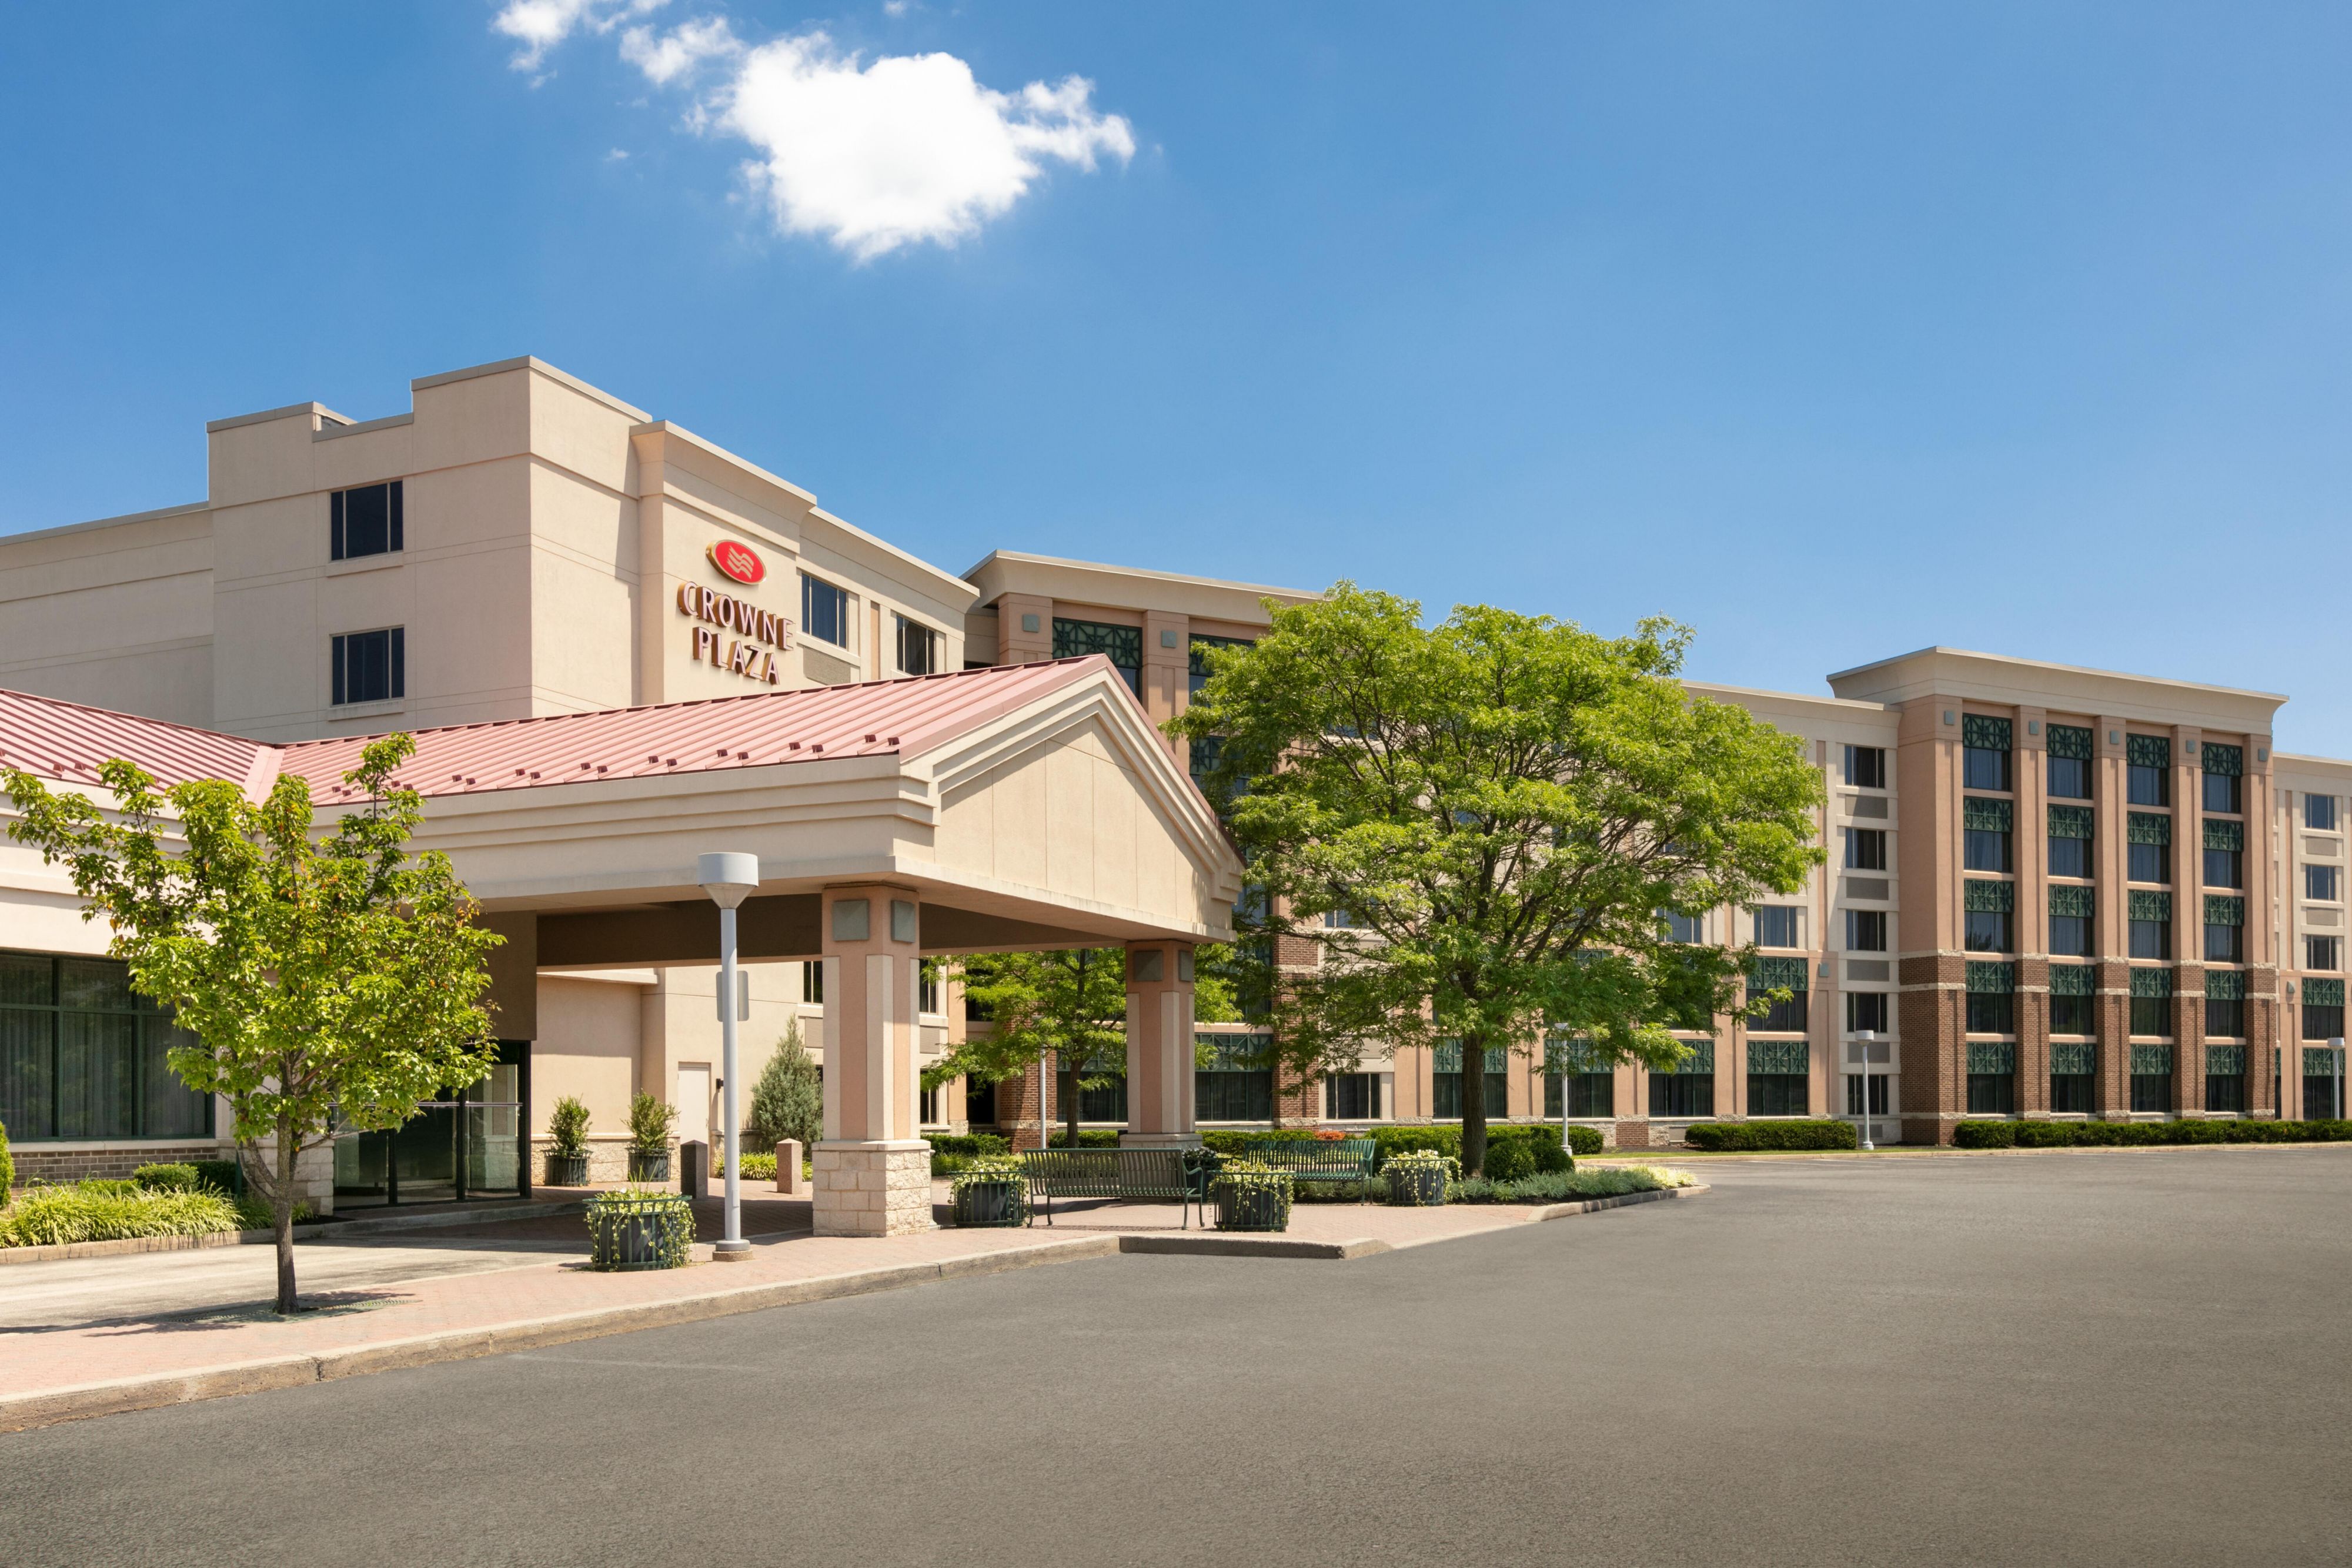 Our Philadelphia area hotel sits next to King of Prussia Mall.